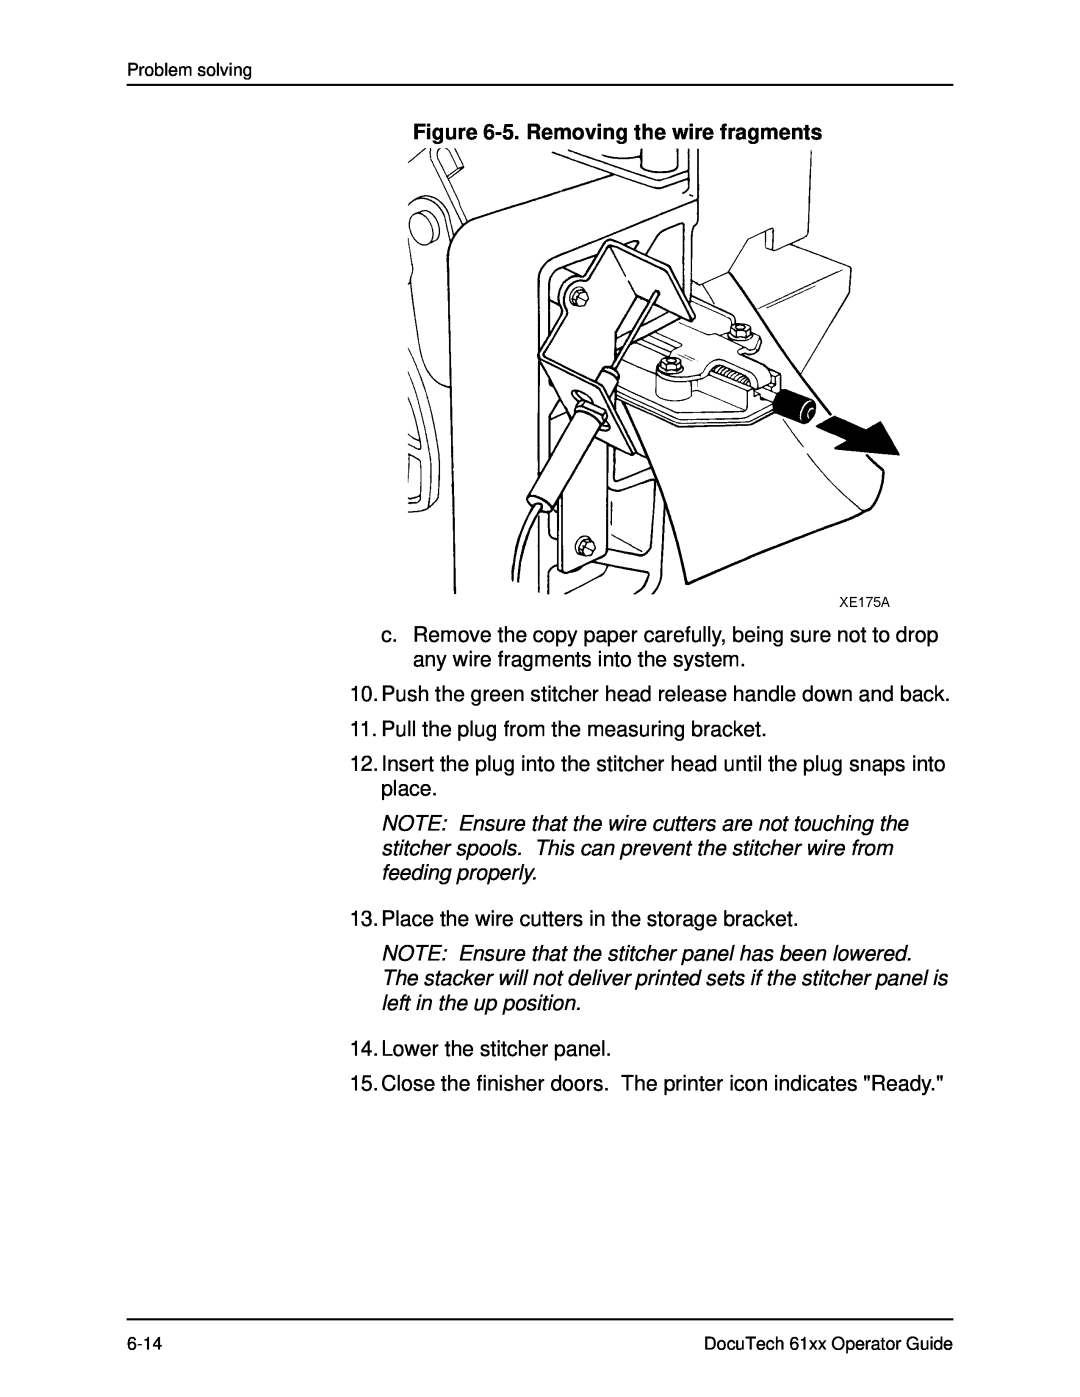 Xerox 61xx manual 5. Removing the wire fragments 